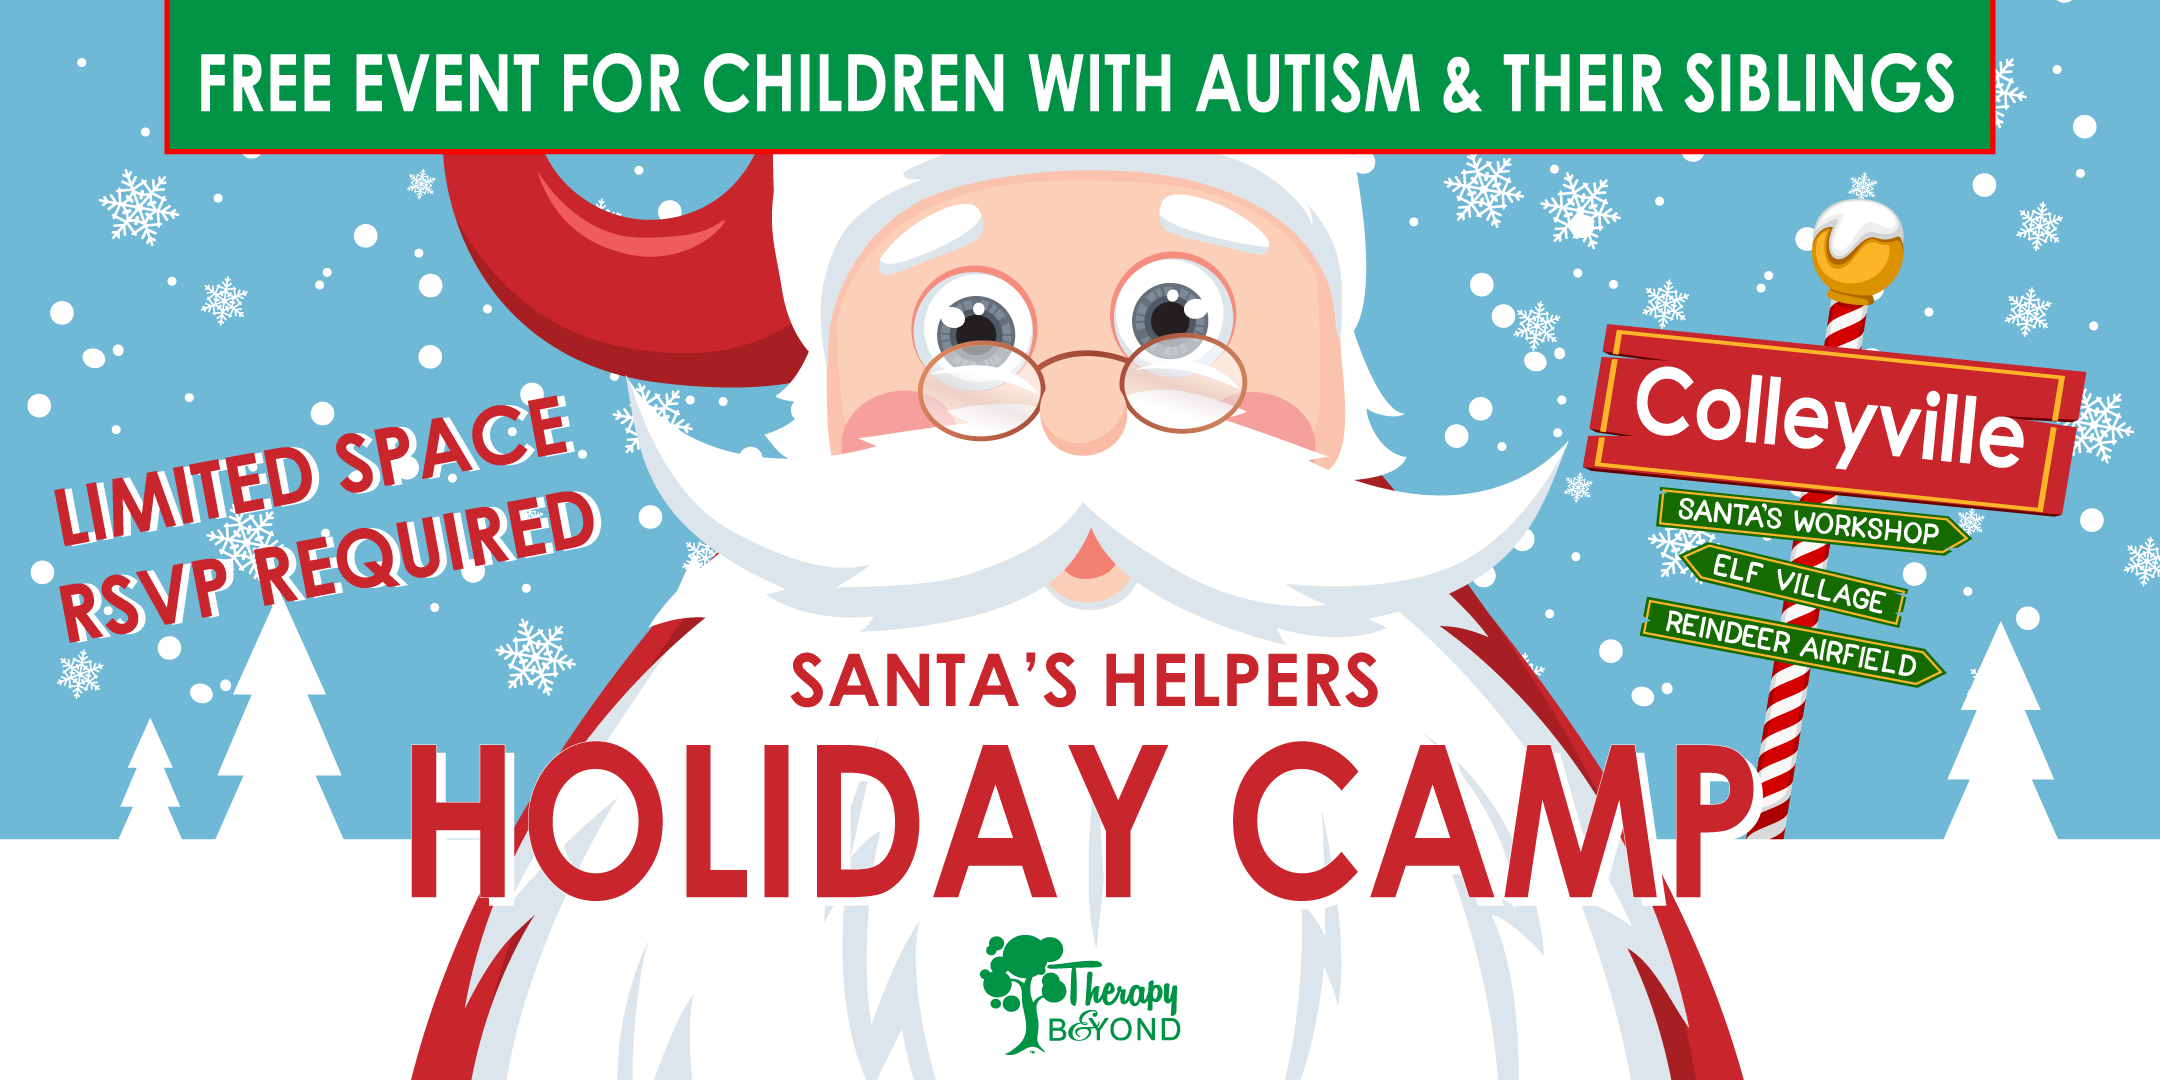 Santa's Helpers Holiday Camp - Colleyville